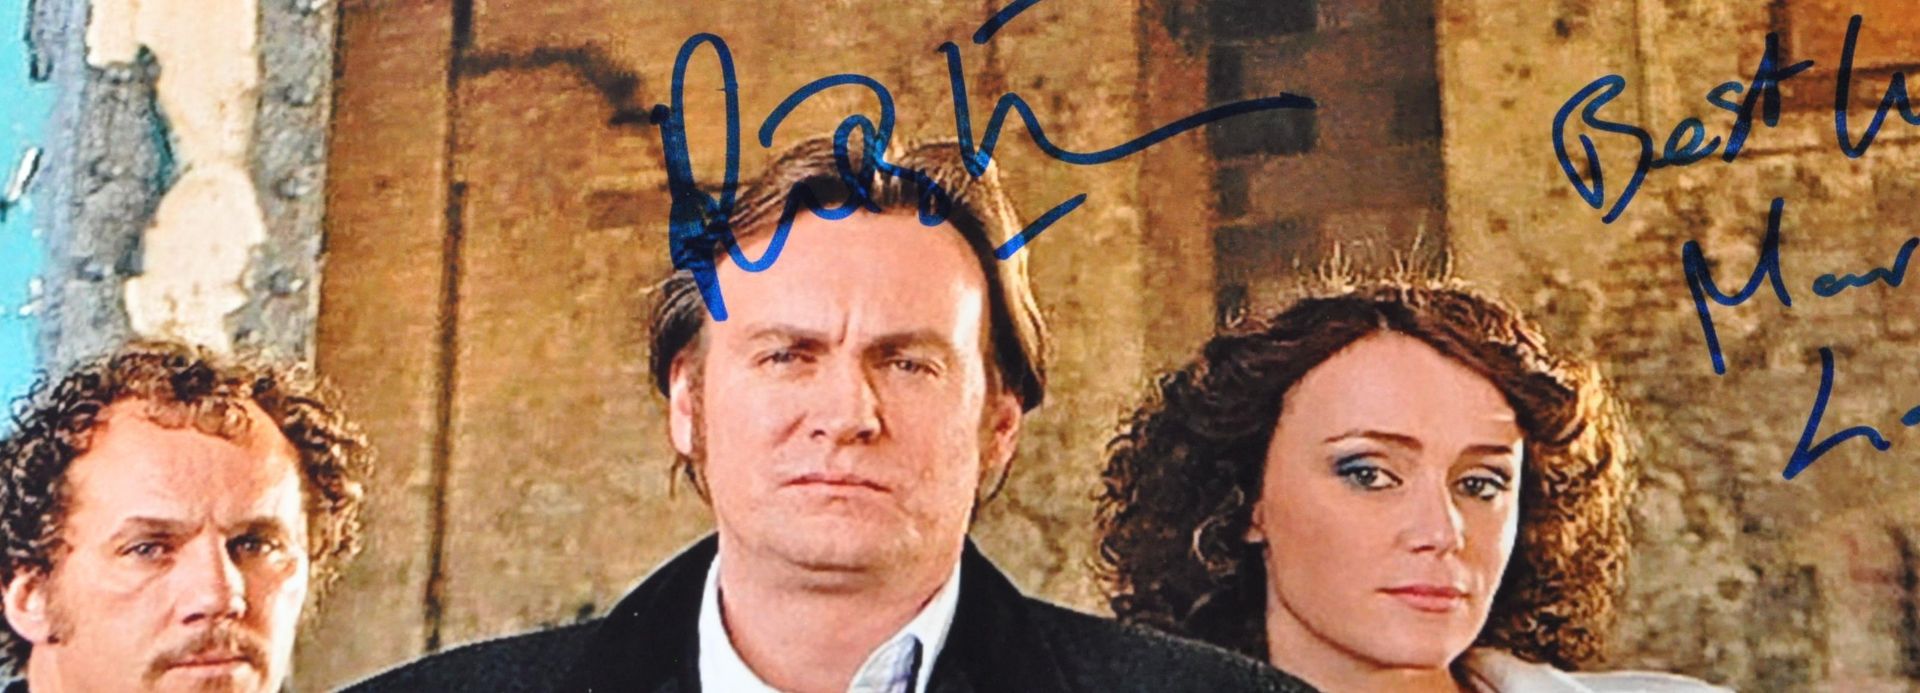 ASHES TO ASHES (2008-2010 BRITISH DRAMA) - X2 CAST AUTOGRAPHED 8X10" PHOTOS - Image 2 of 3